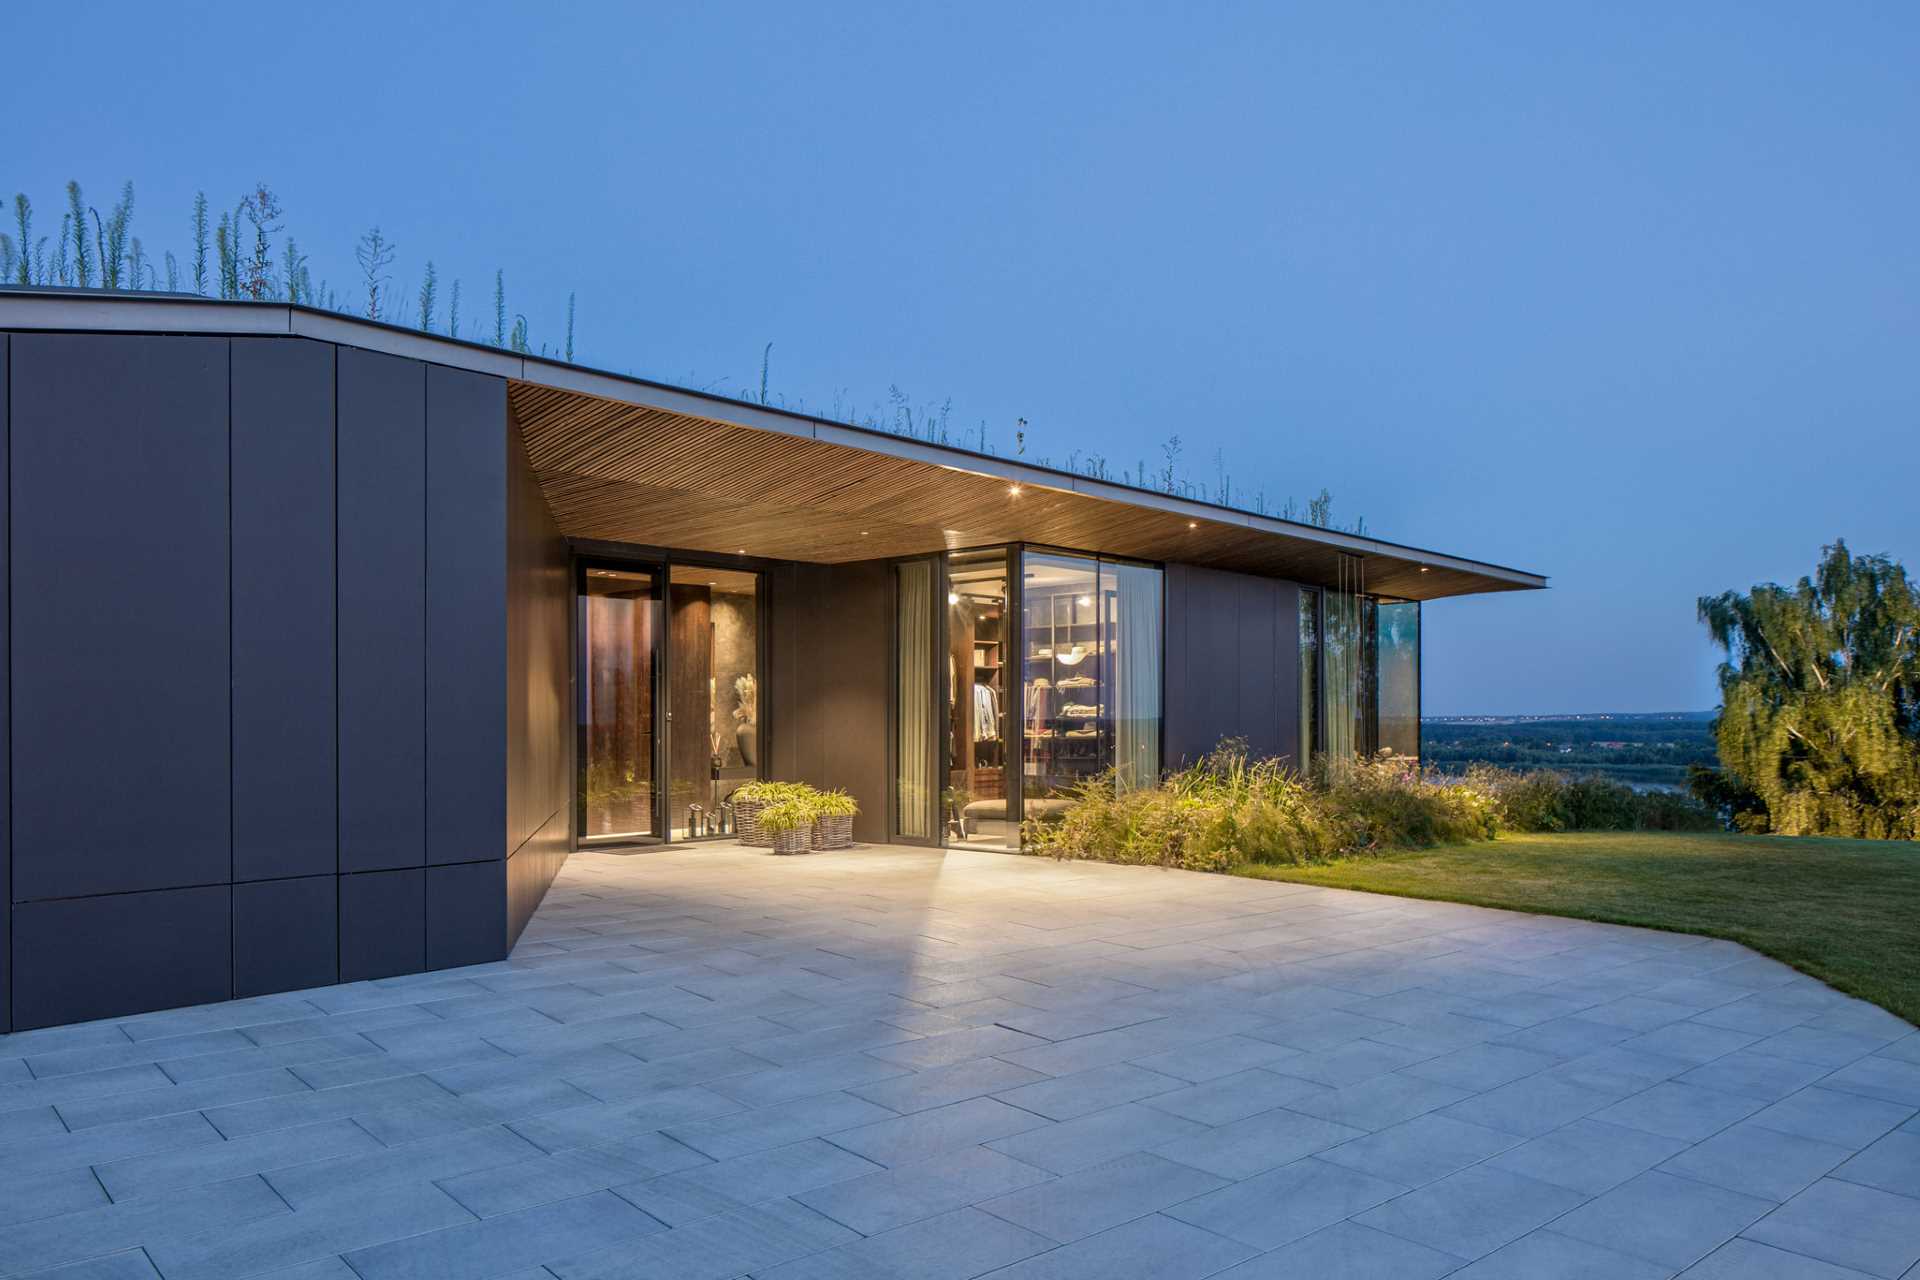 A paved area leads to the front door of this modern house with a green roof.